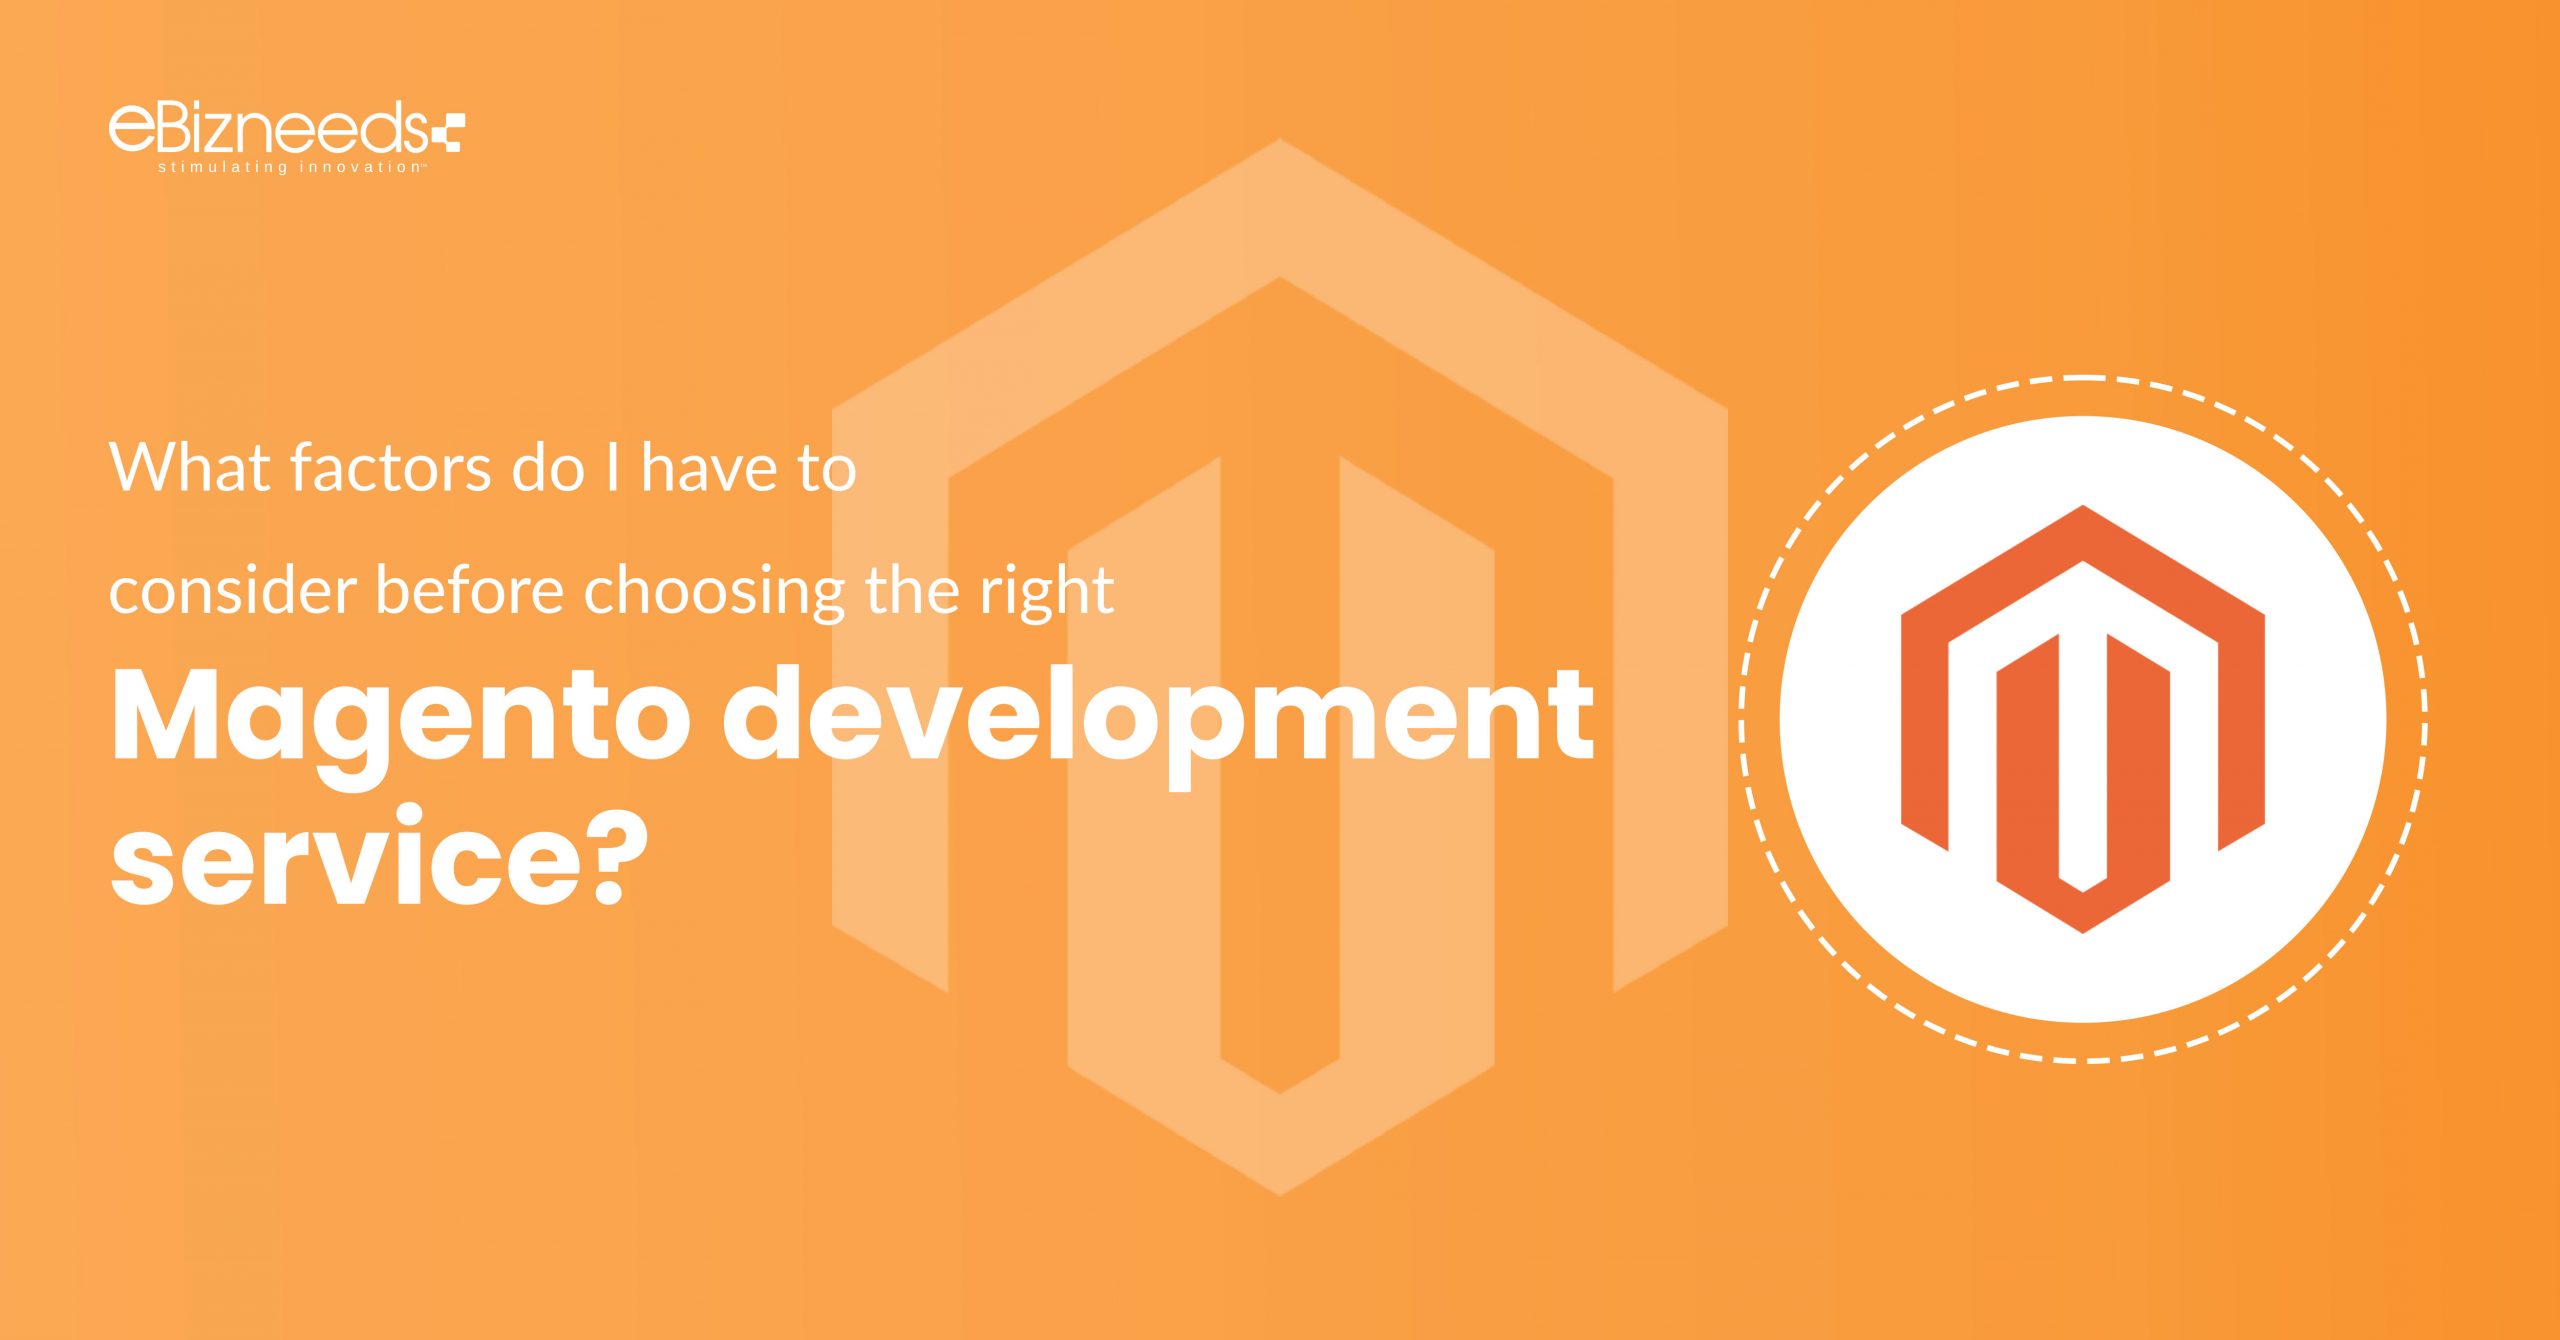 What factors do I have to consider before choosing the right magento development service